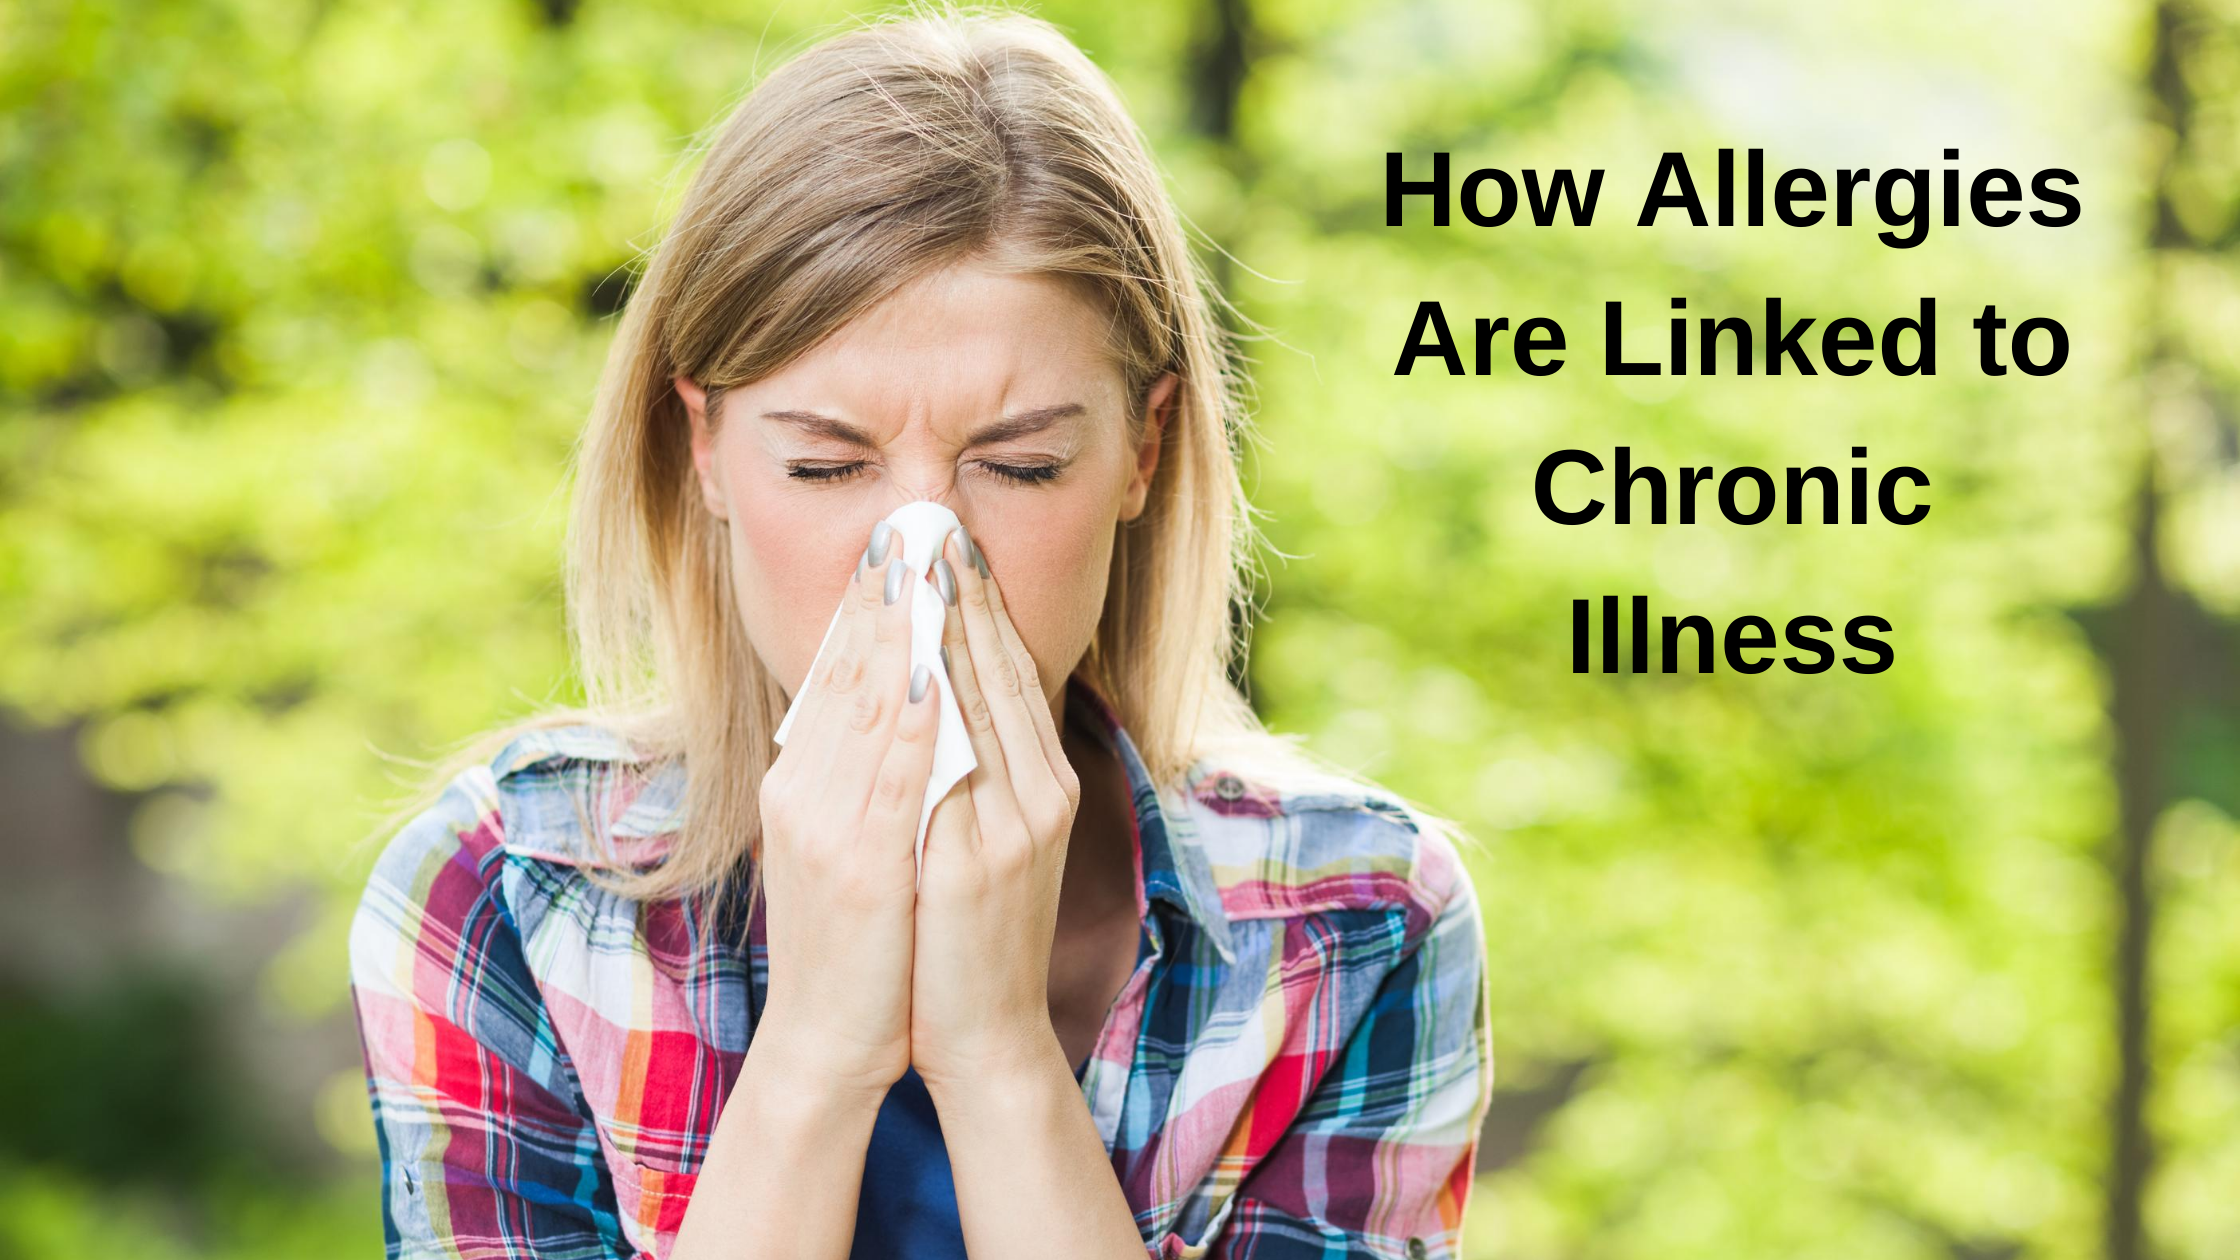 How Allergies Are Linked to Chronic Illness